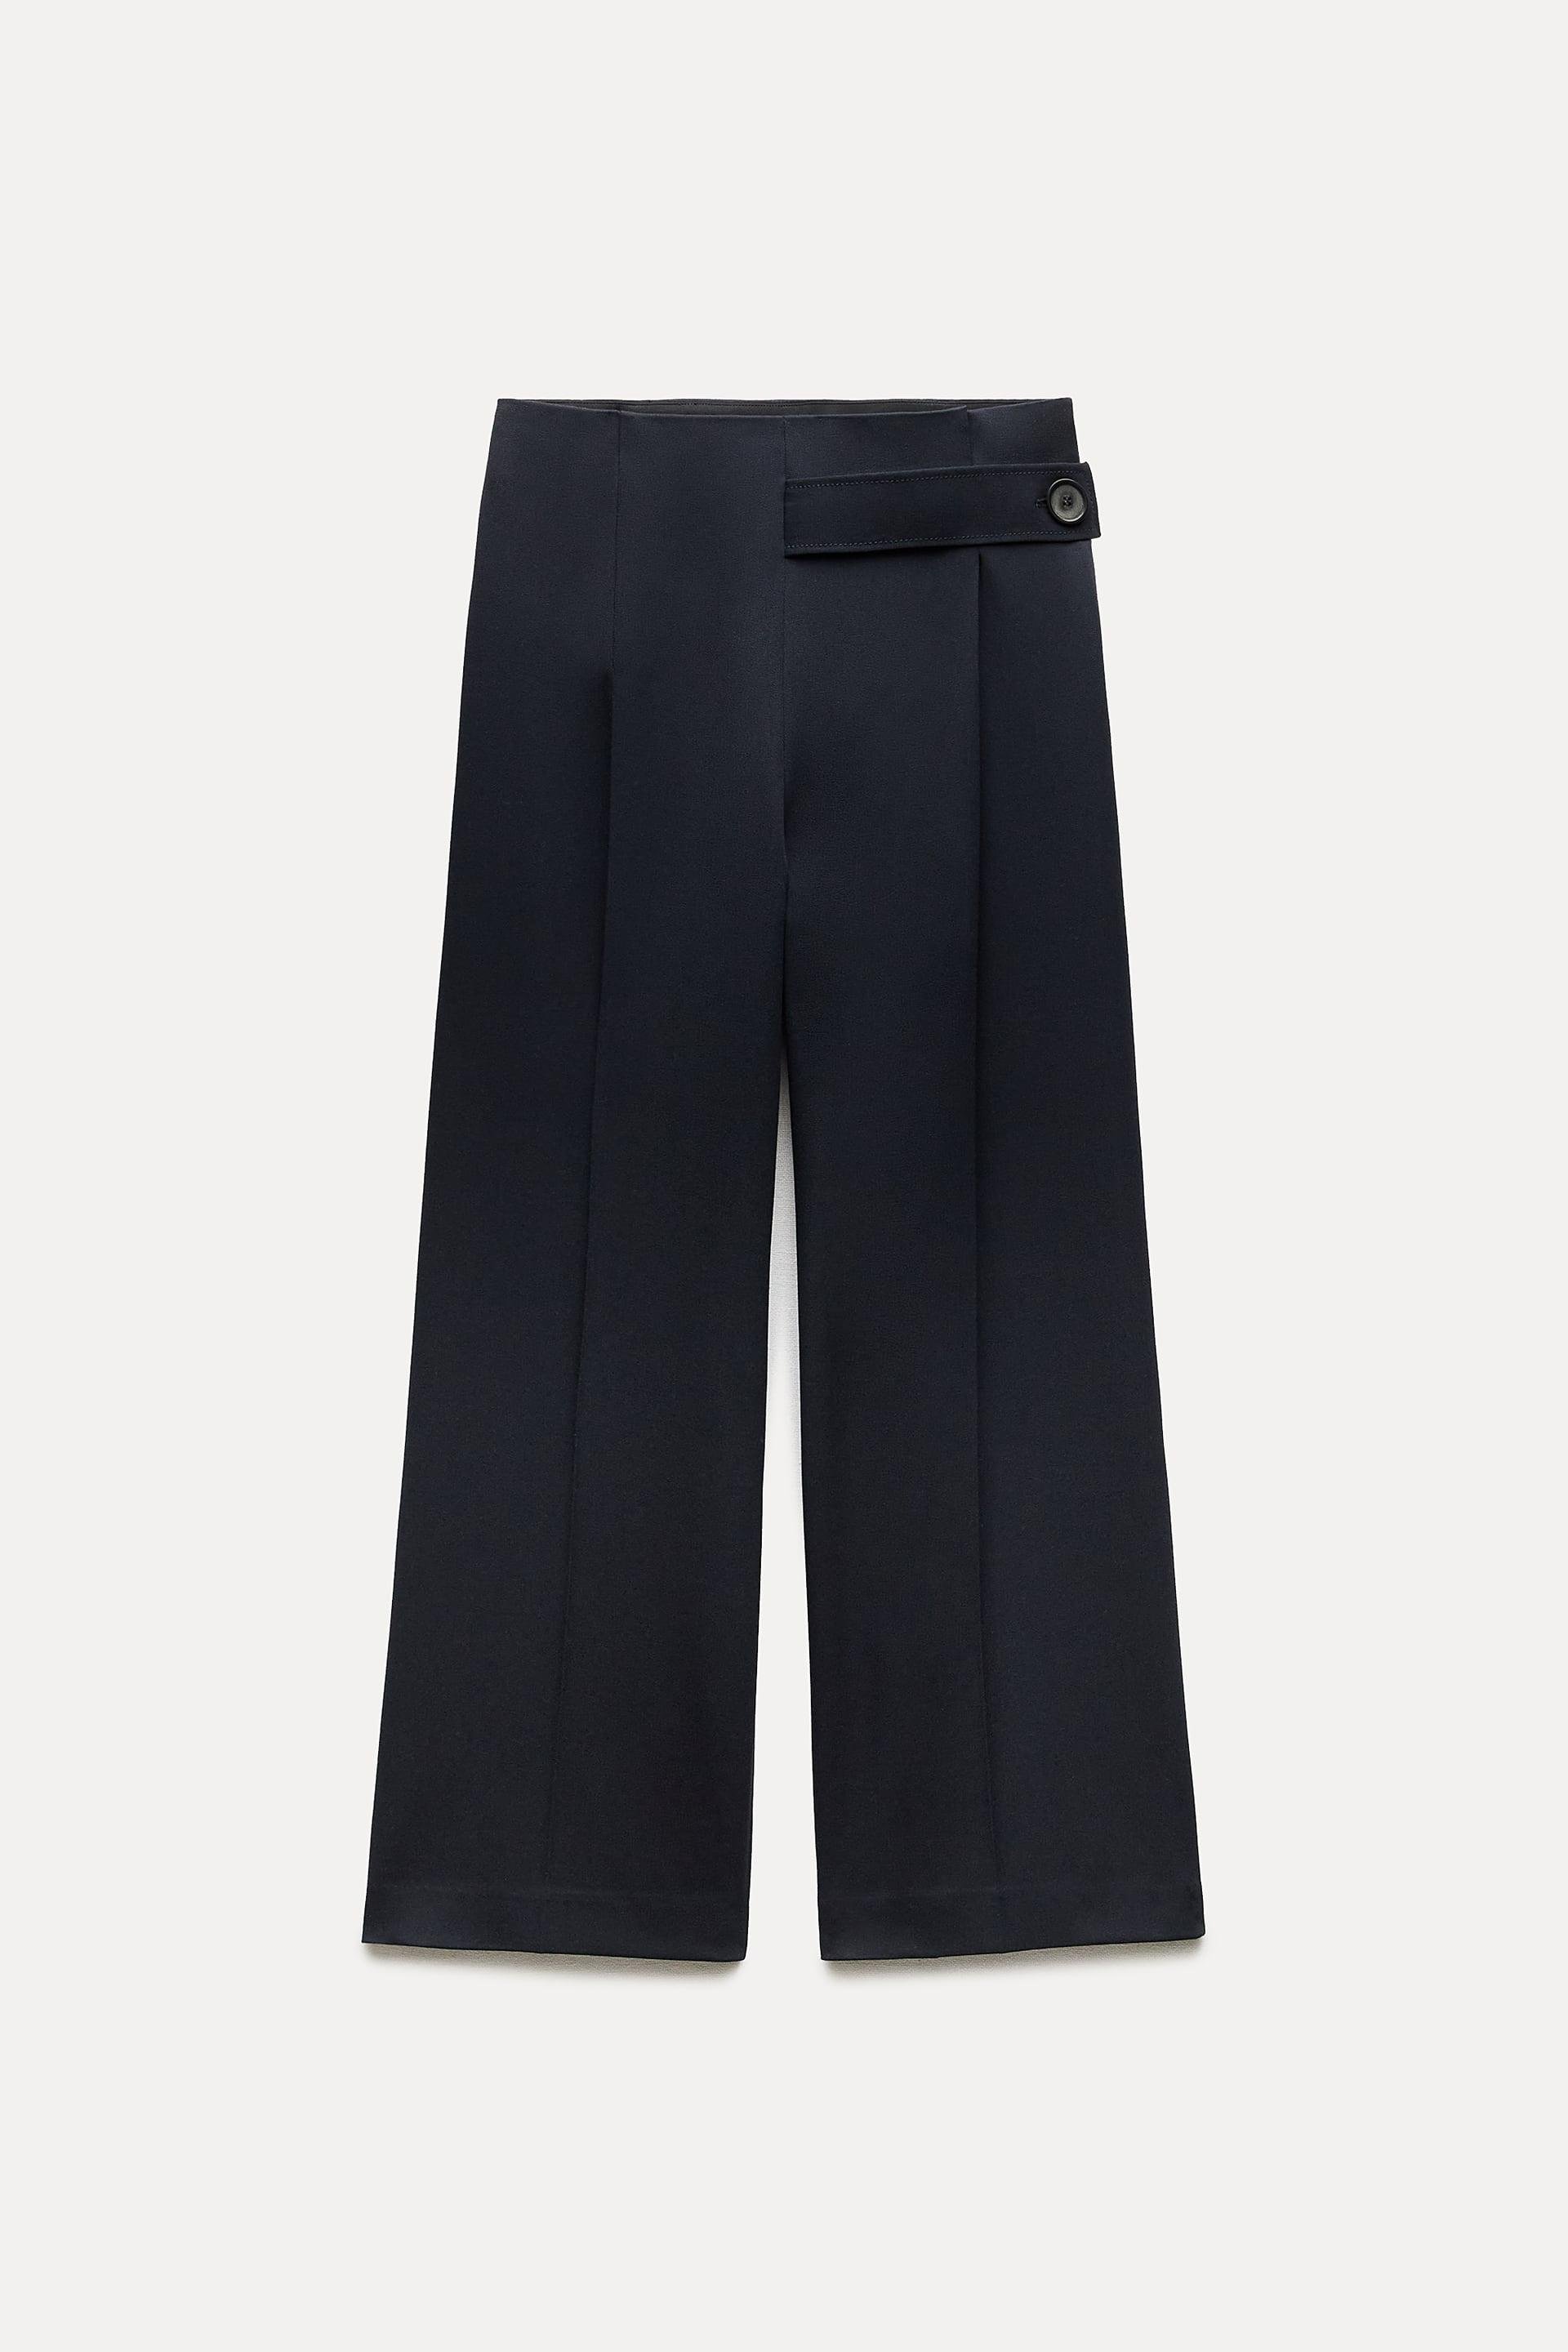 ZW COLLECTION CULOTTES by ZARA